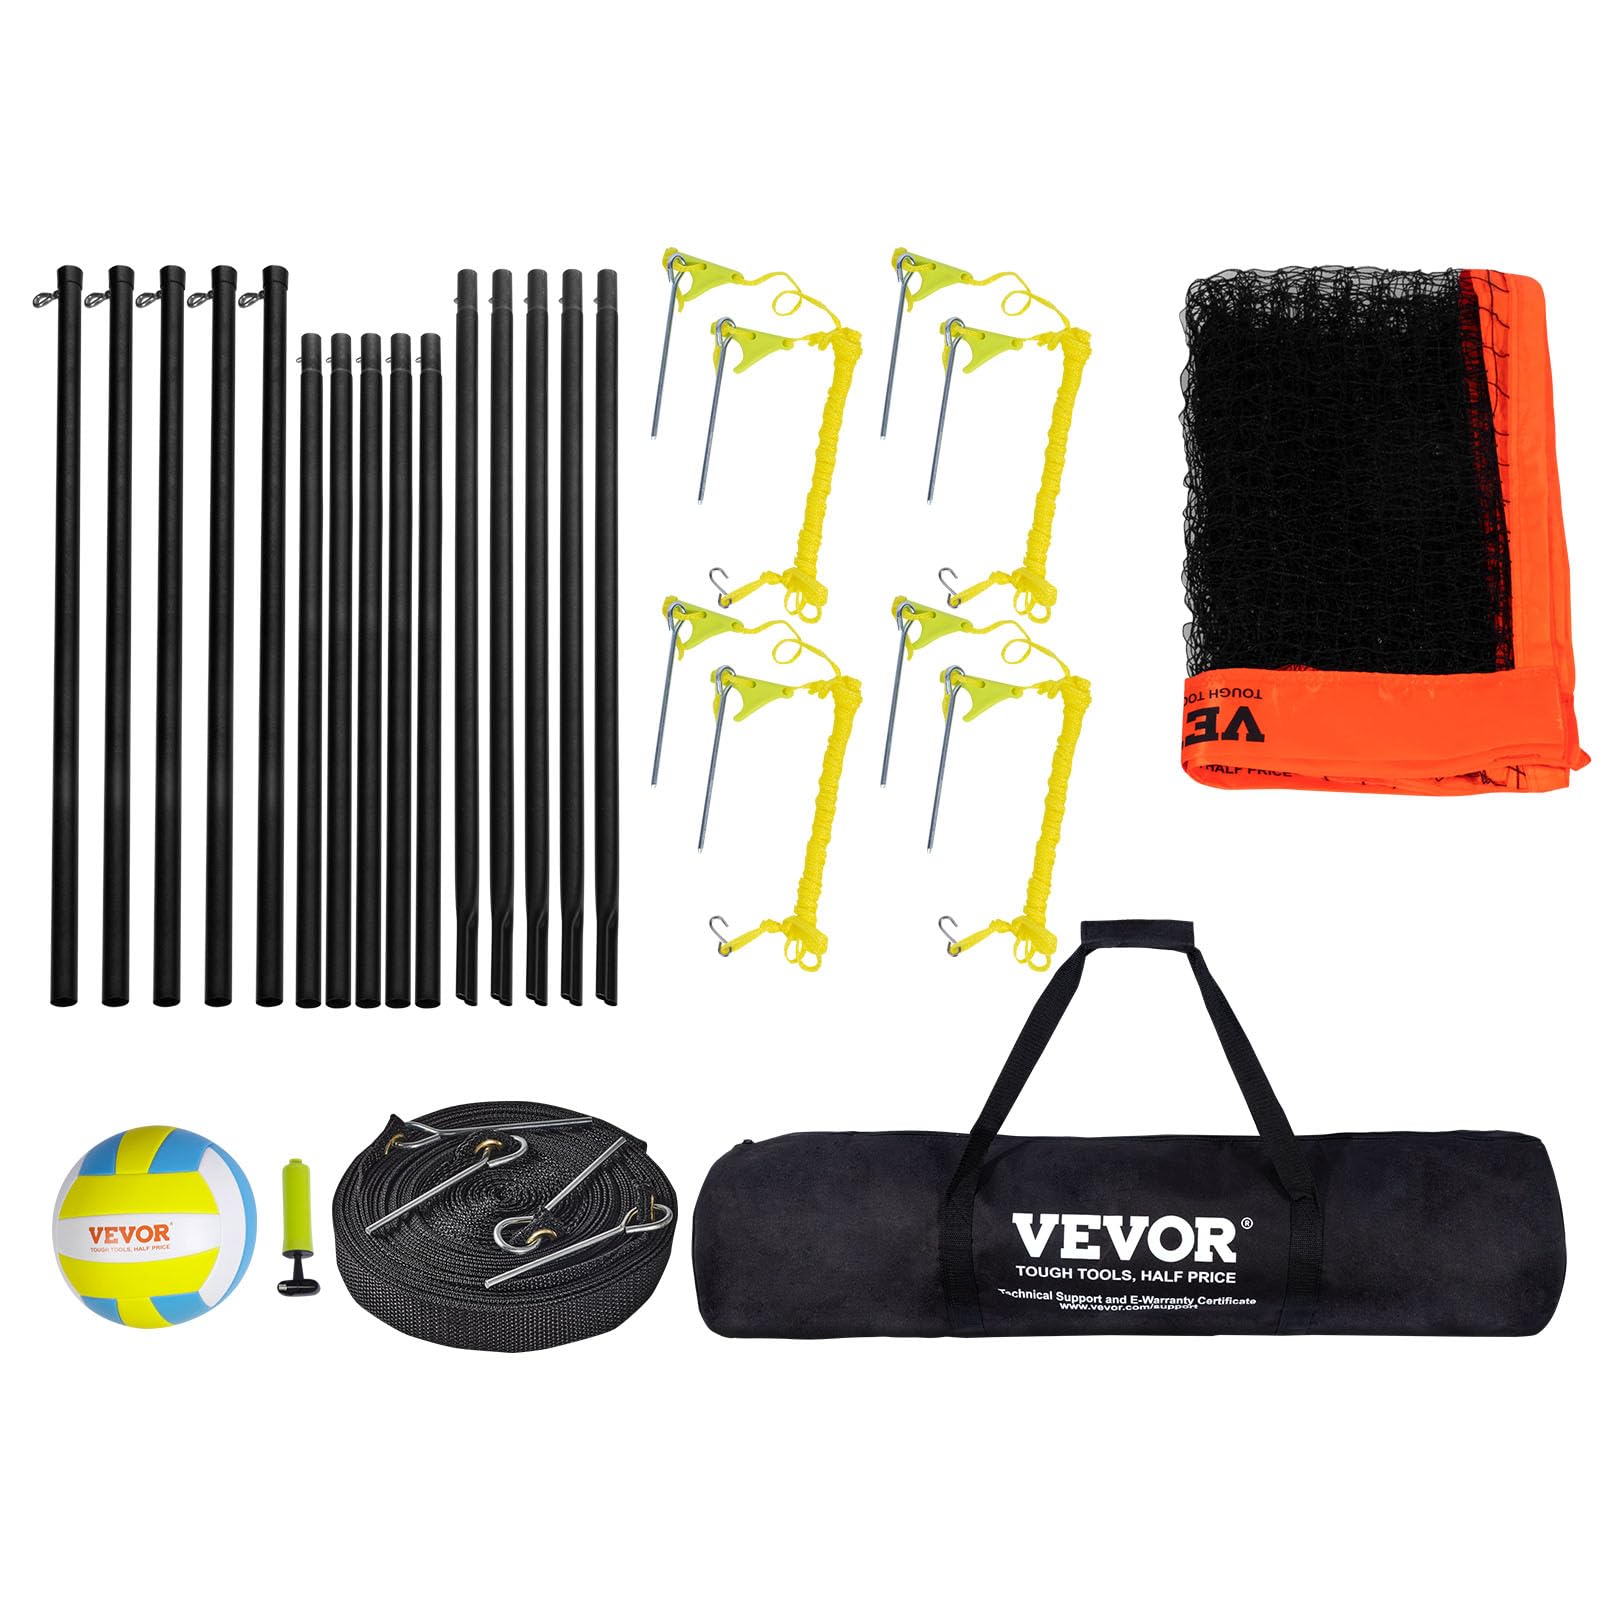 VEVOR 4-Way Volleyball Net, Adjustable Height Badminton Net Set for Backyard Beach Lawn, Outdoor Portable Volleyball Net with Carrying Bag, 4 Square Quick Assemble Game Set for Kids and Adults